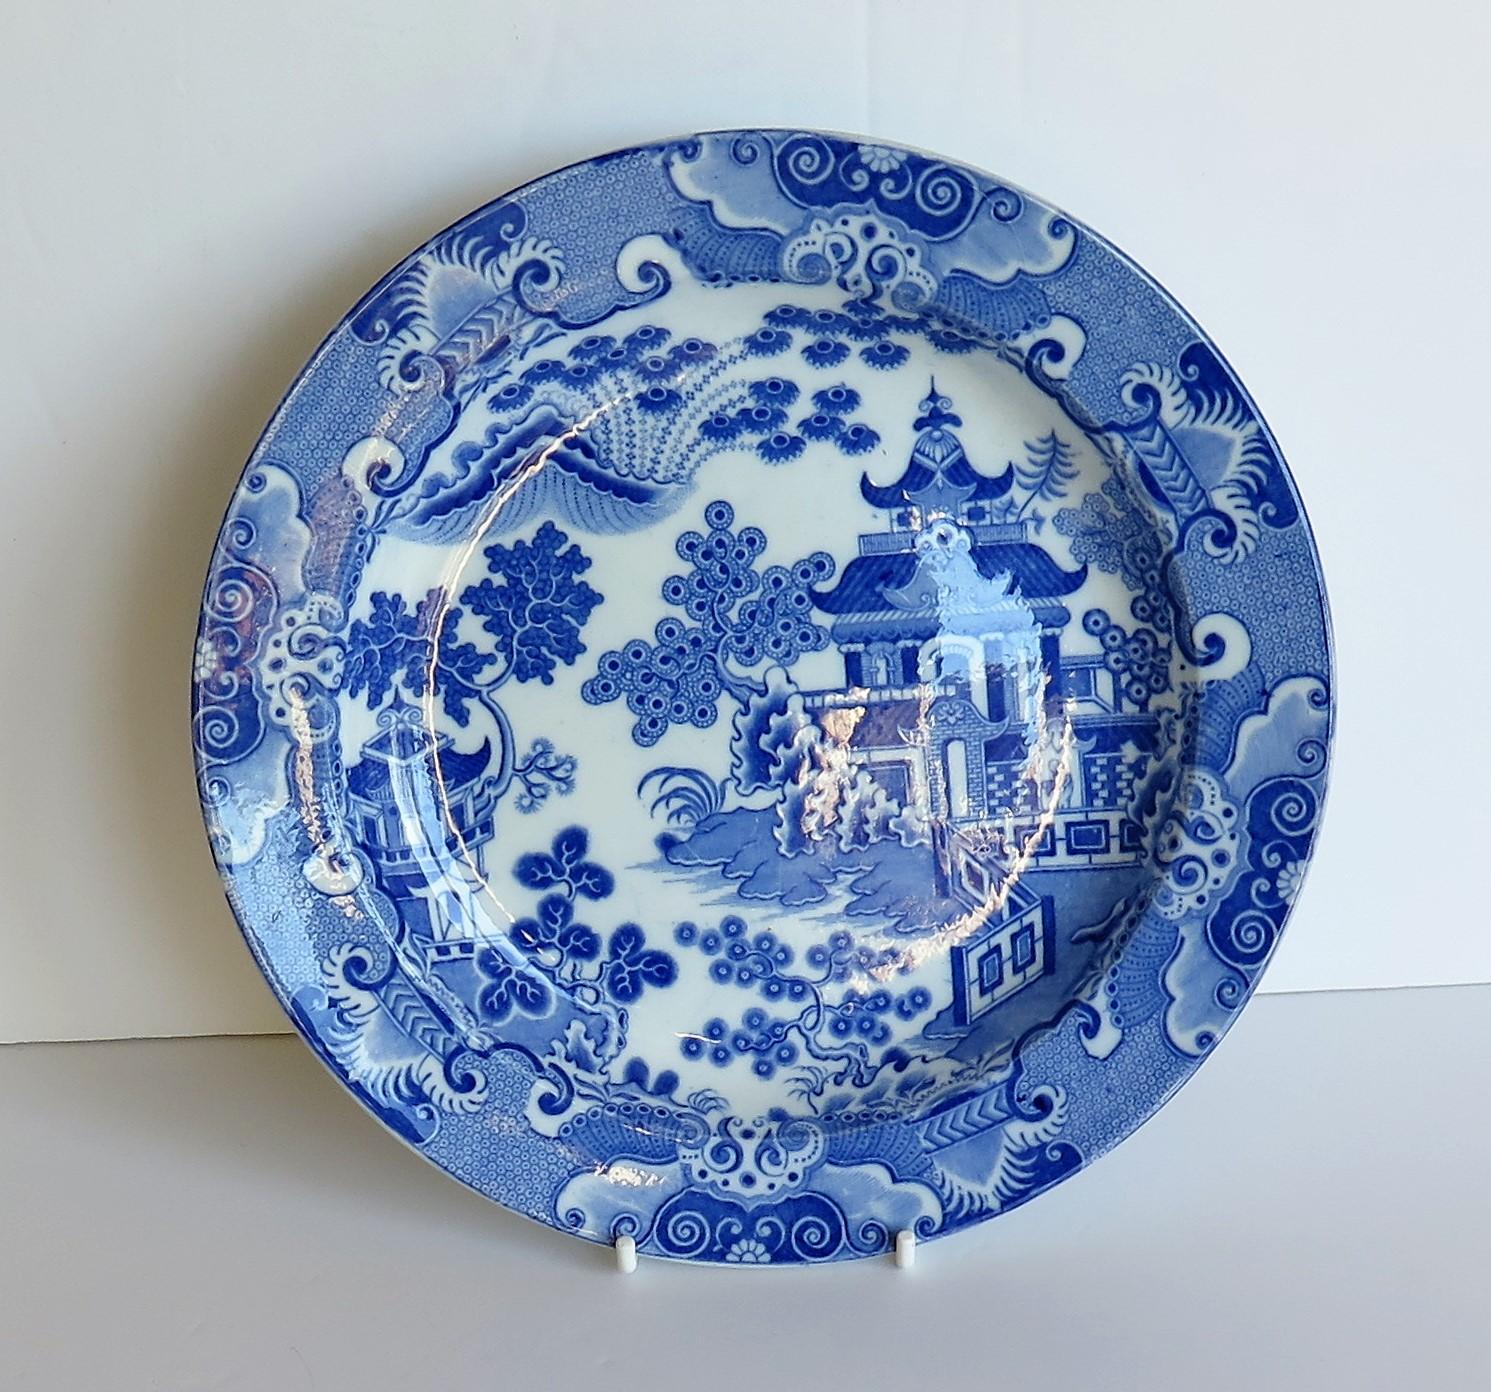 This is a beautiful early plate in a printed blue and white chinoiserie pattern and made of a type of earthenware pottery called Pearl-ware, in the very early 19th century by the Spode factory, circa 1805.

This plate is made of Pearlware